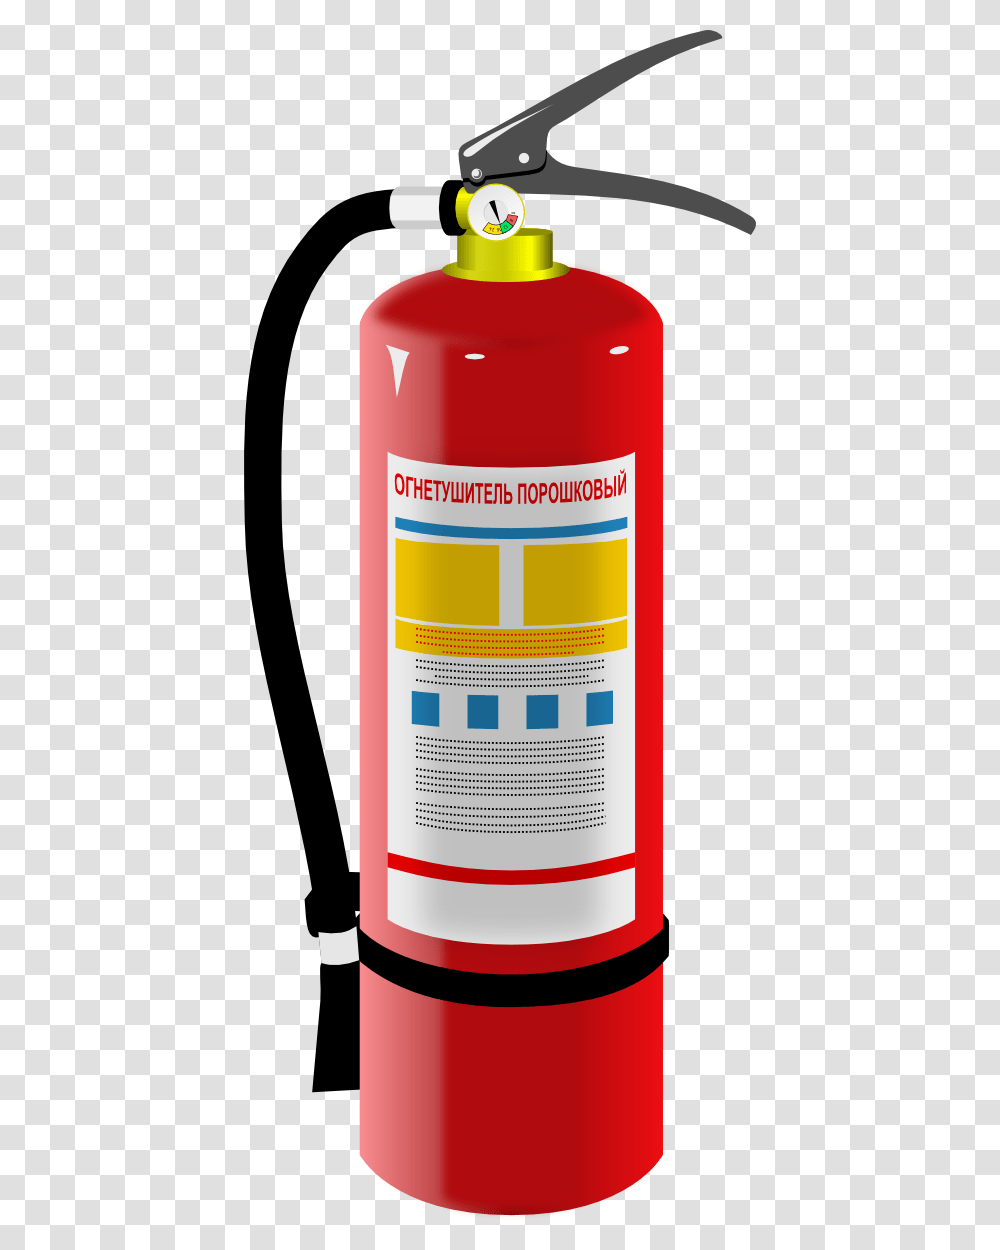 Flame Clipart Suggestions For Flame Clipart Download Flame Clipart, Machine, Gas Pump, Dynamite, Bomb Transparent Png